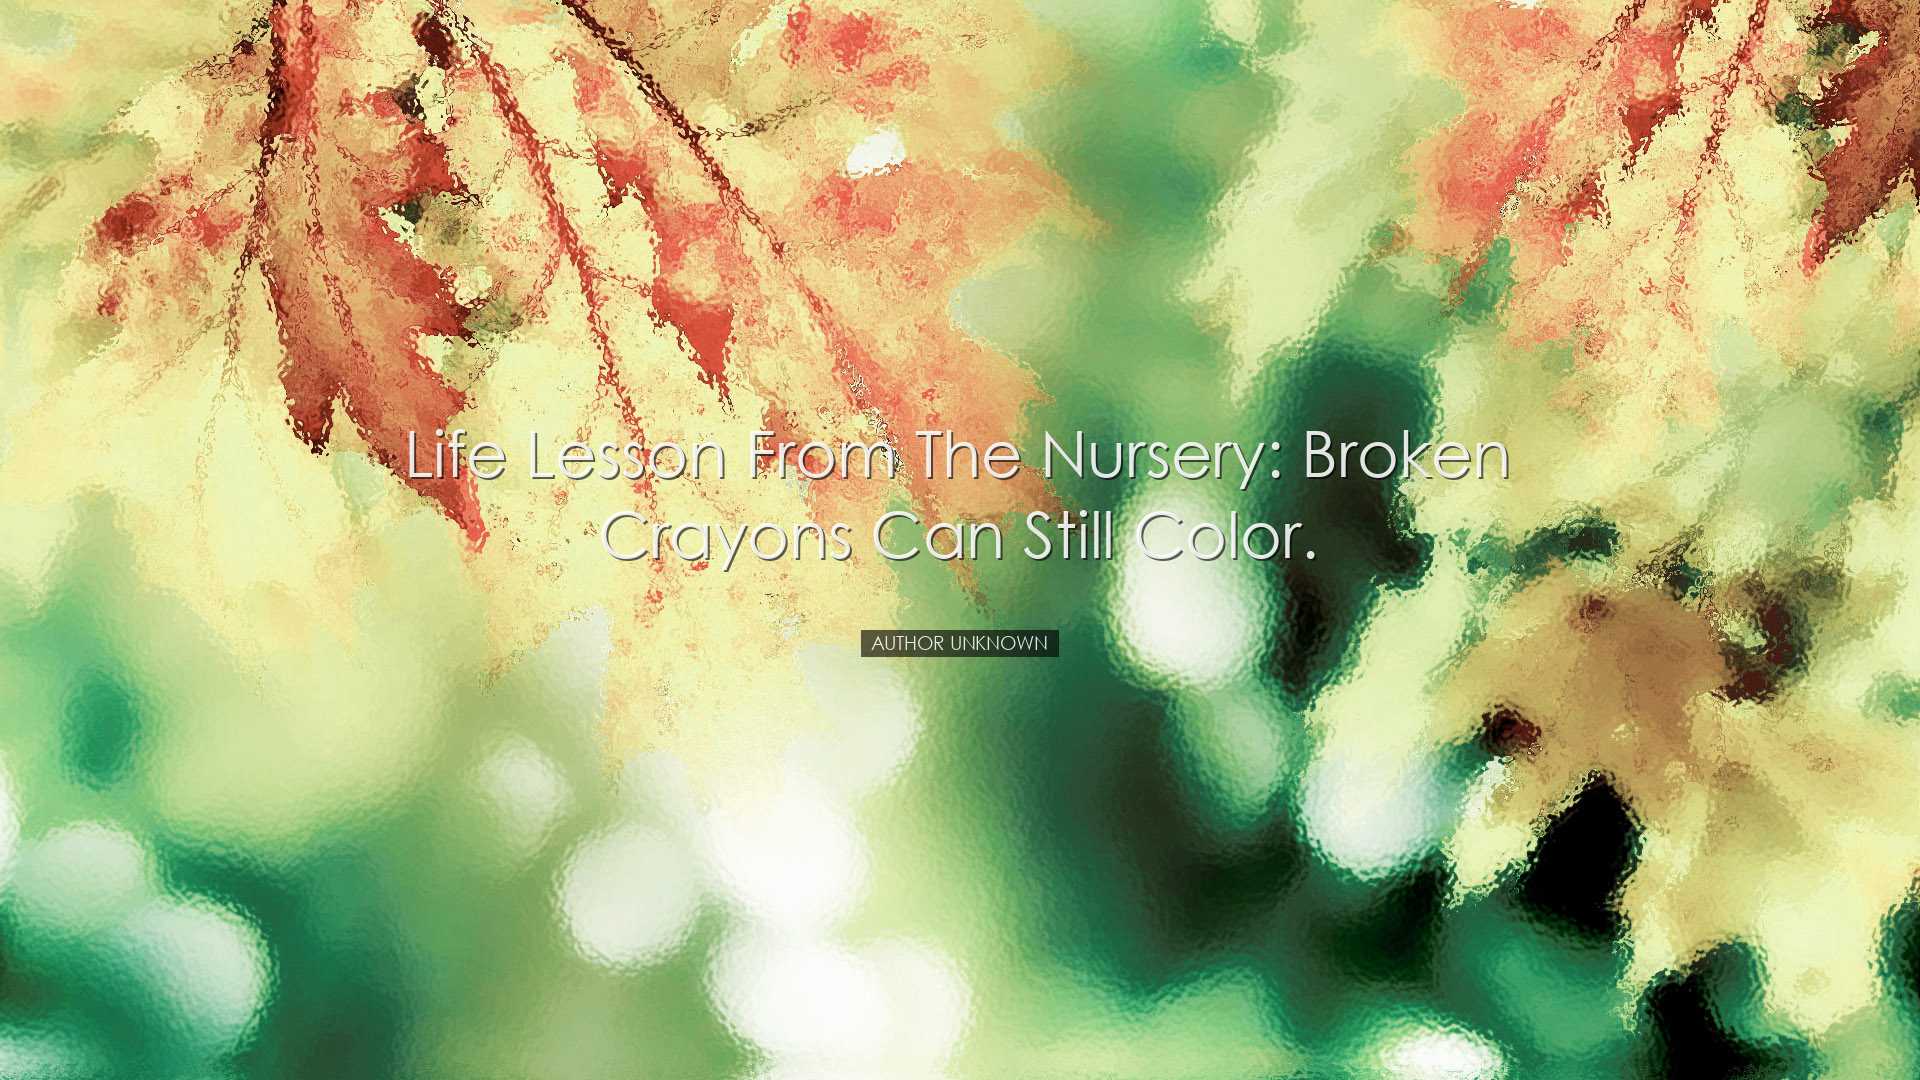 Life lesson from the nursery: Broken crayons can still color. - Au